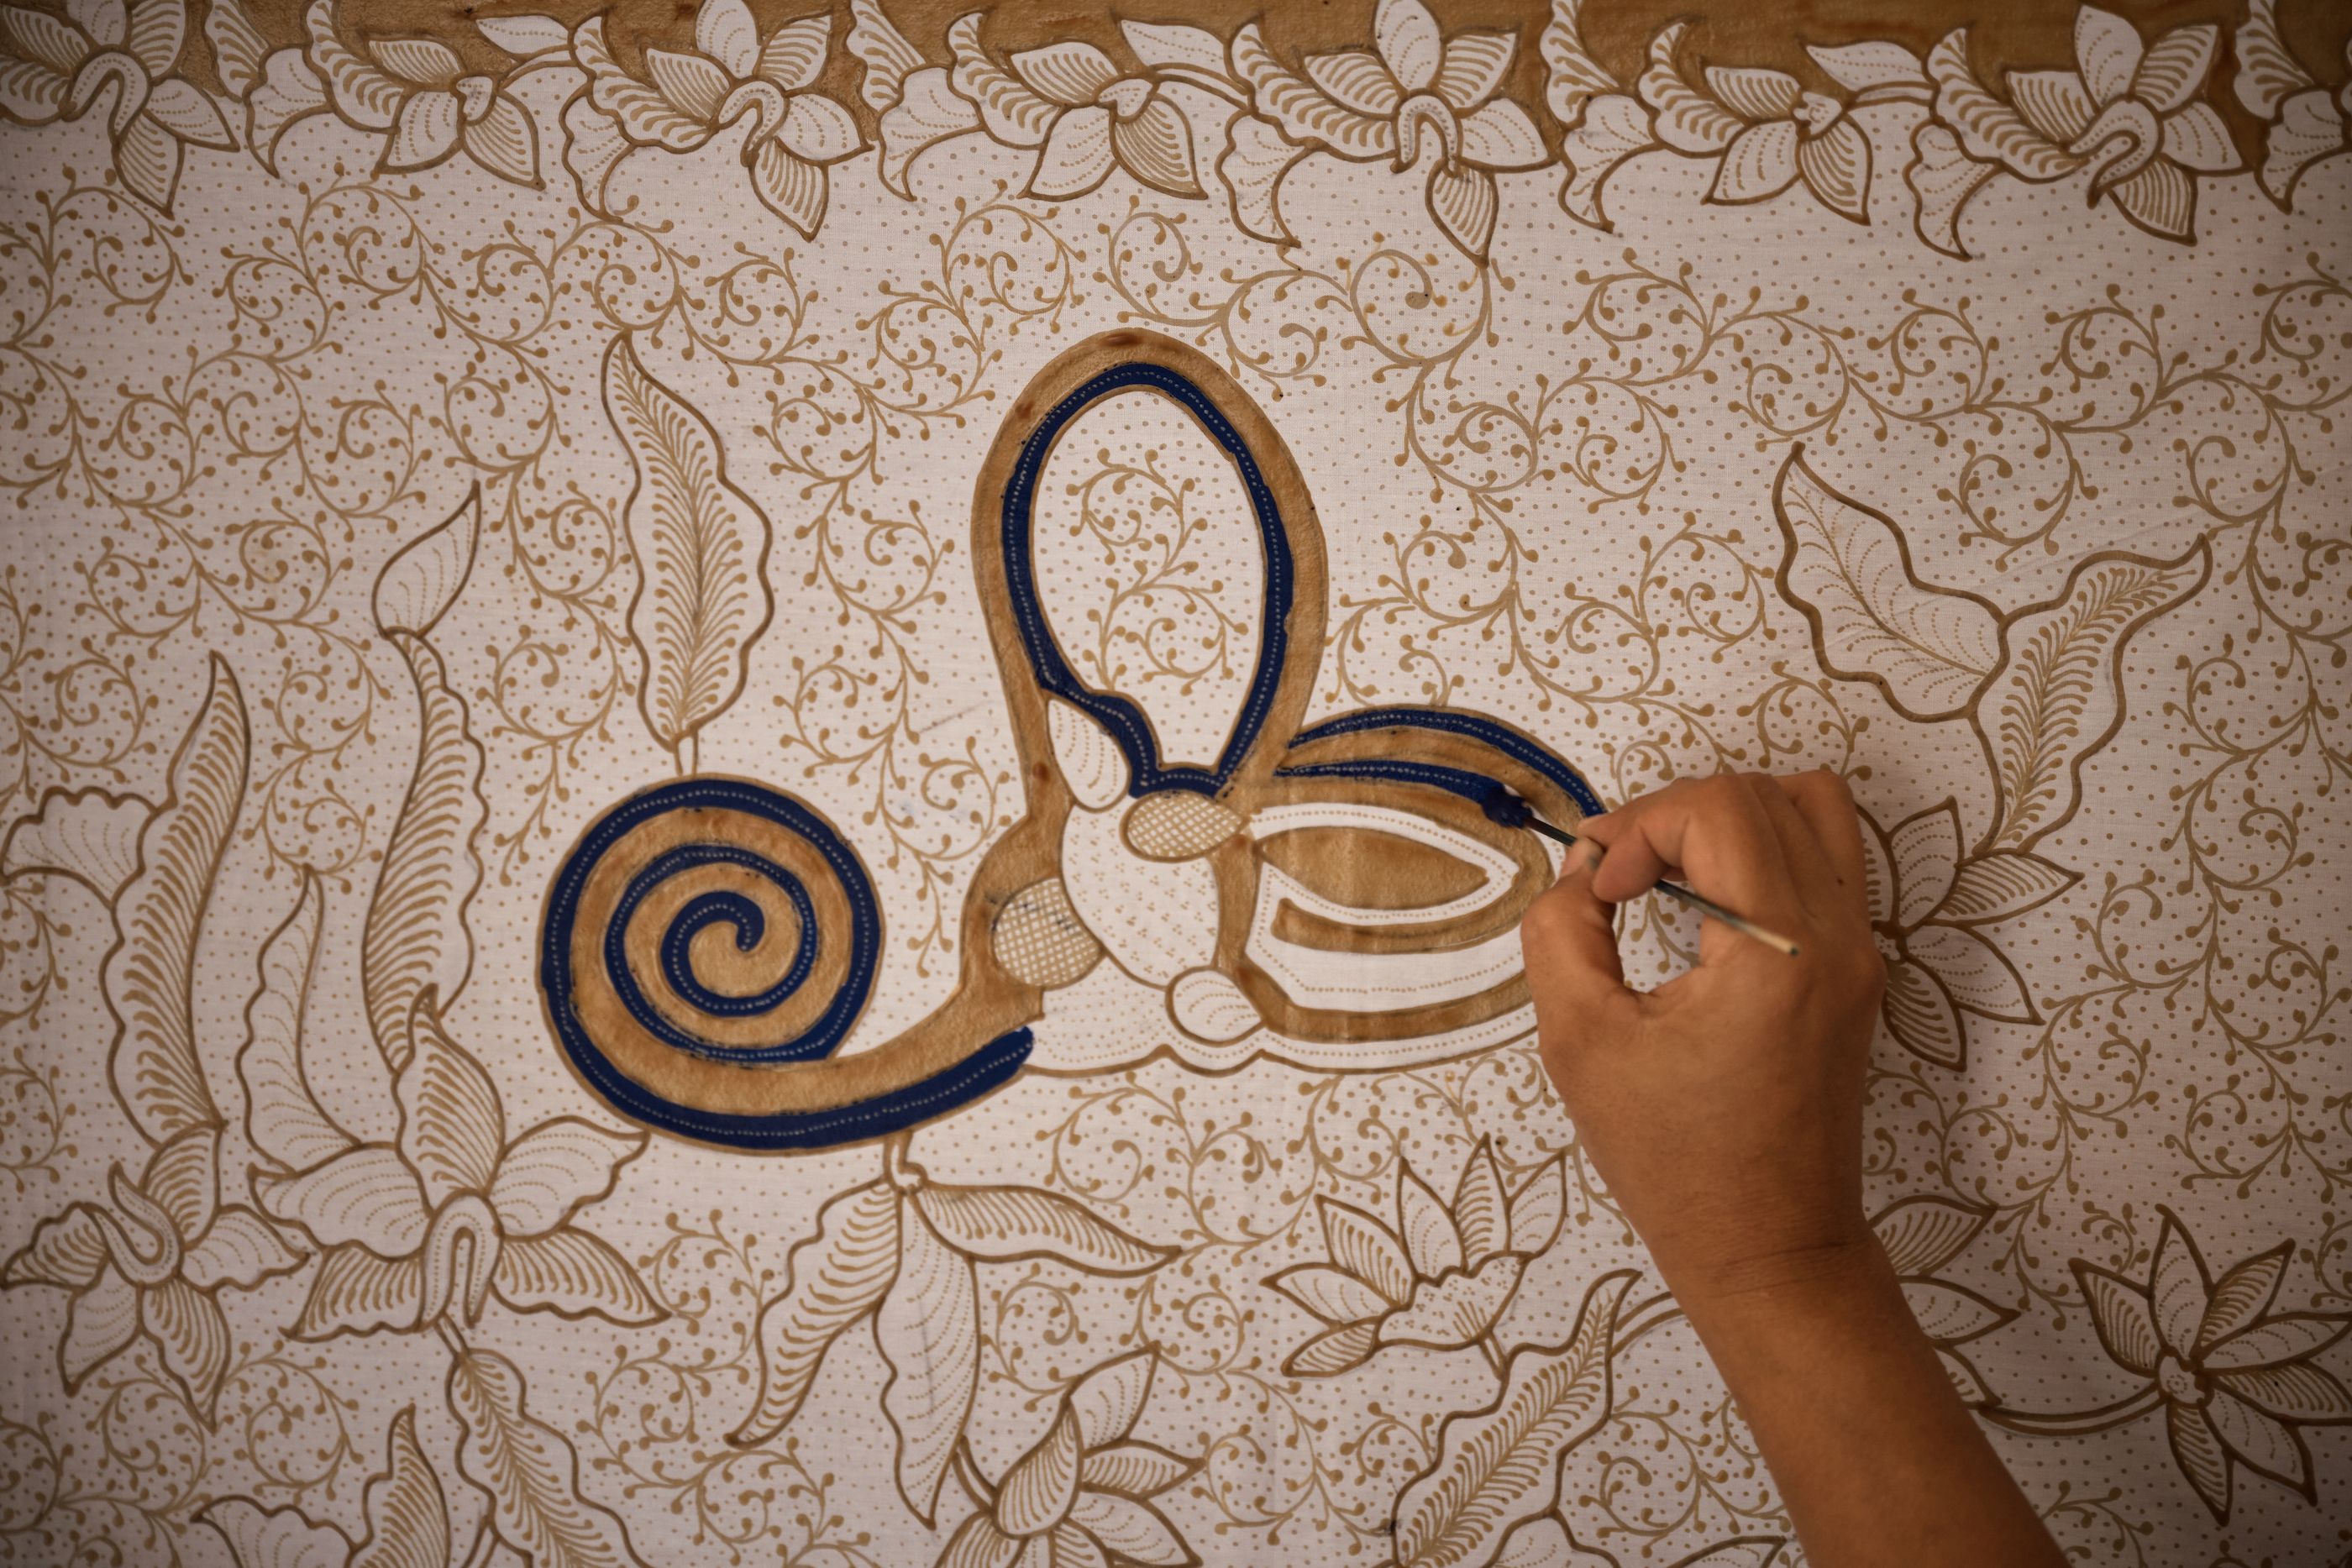 A hand seen from above, painting a traditional Indonesian Batik design onto fabric using brown and black inks.